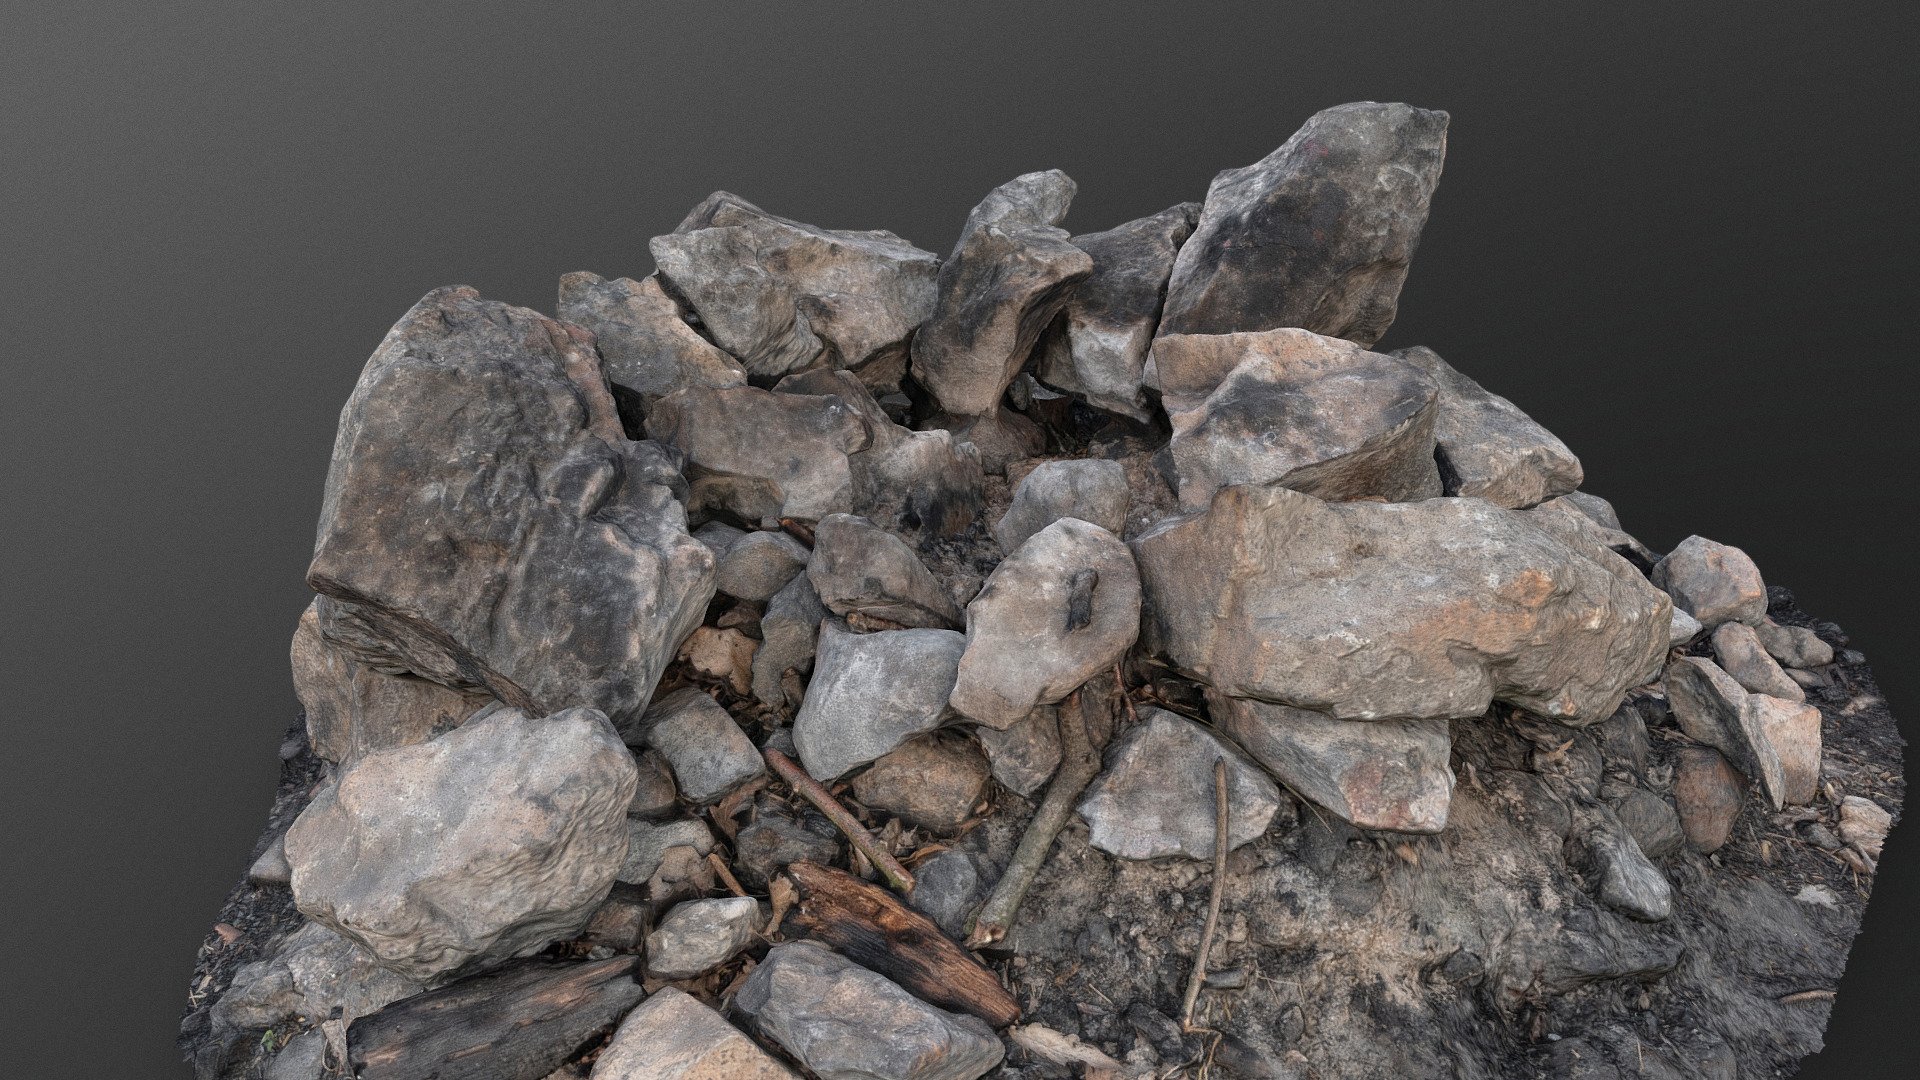 Fireplace fire pit hole in meadow forest, campfire natural made of dark stones

photogrammetry scan (150x36mp), 3x16k textures + hd normals - Fireplace fire pit hole campfire of dark stones - Buy Royalty Free 3D model by matousekfoto 3d model